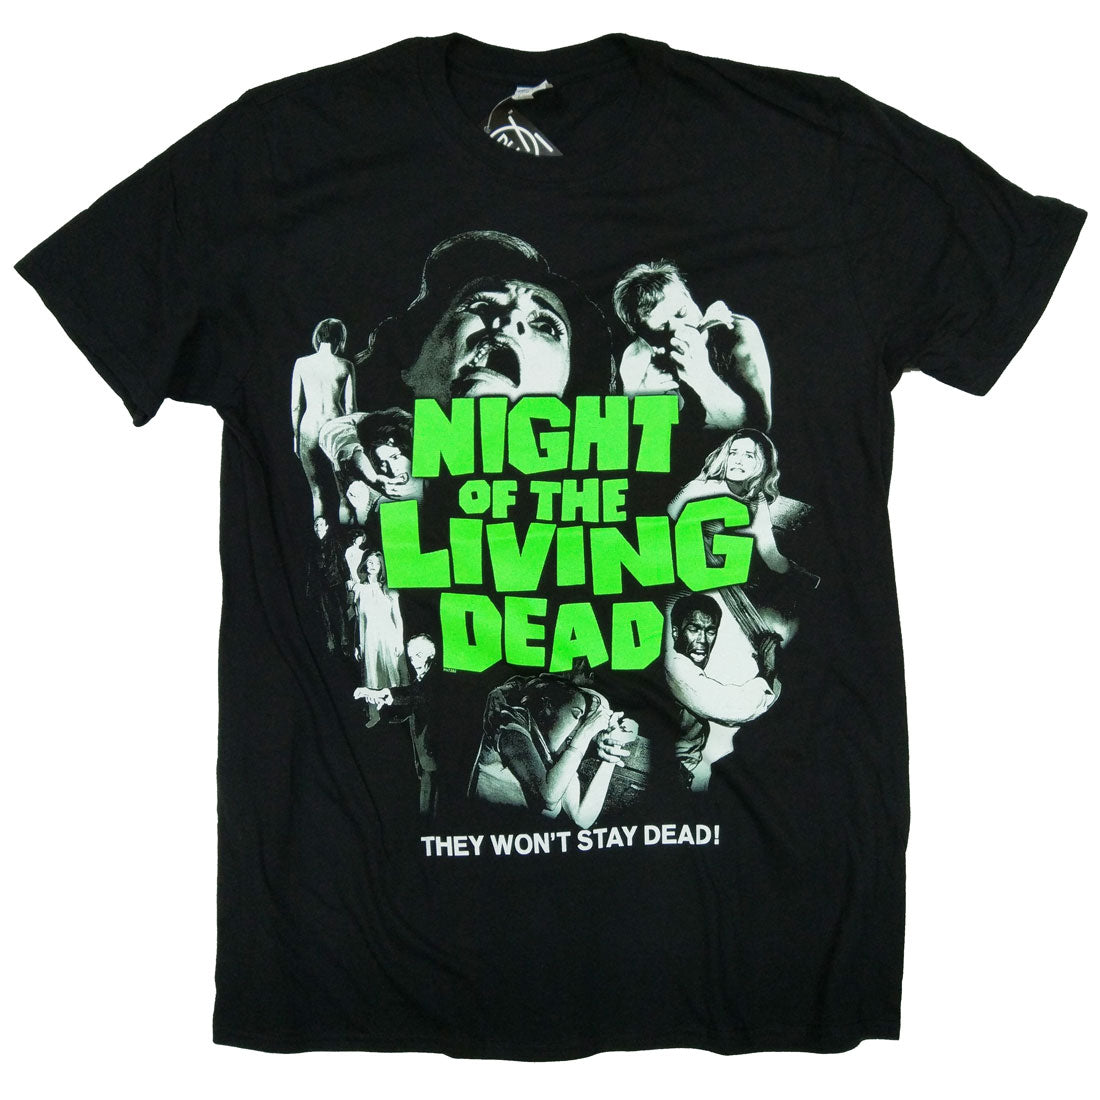 Night Of The Living Dead T Shirt - 100% Official Classic Colour Poster Design Black